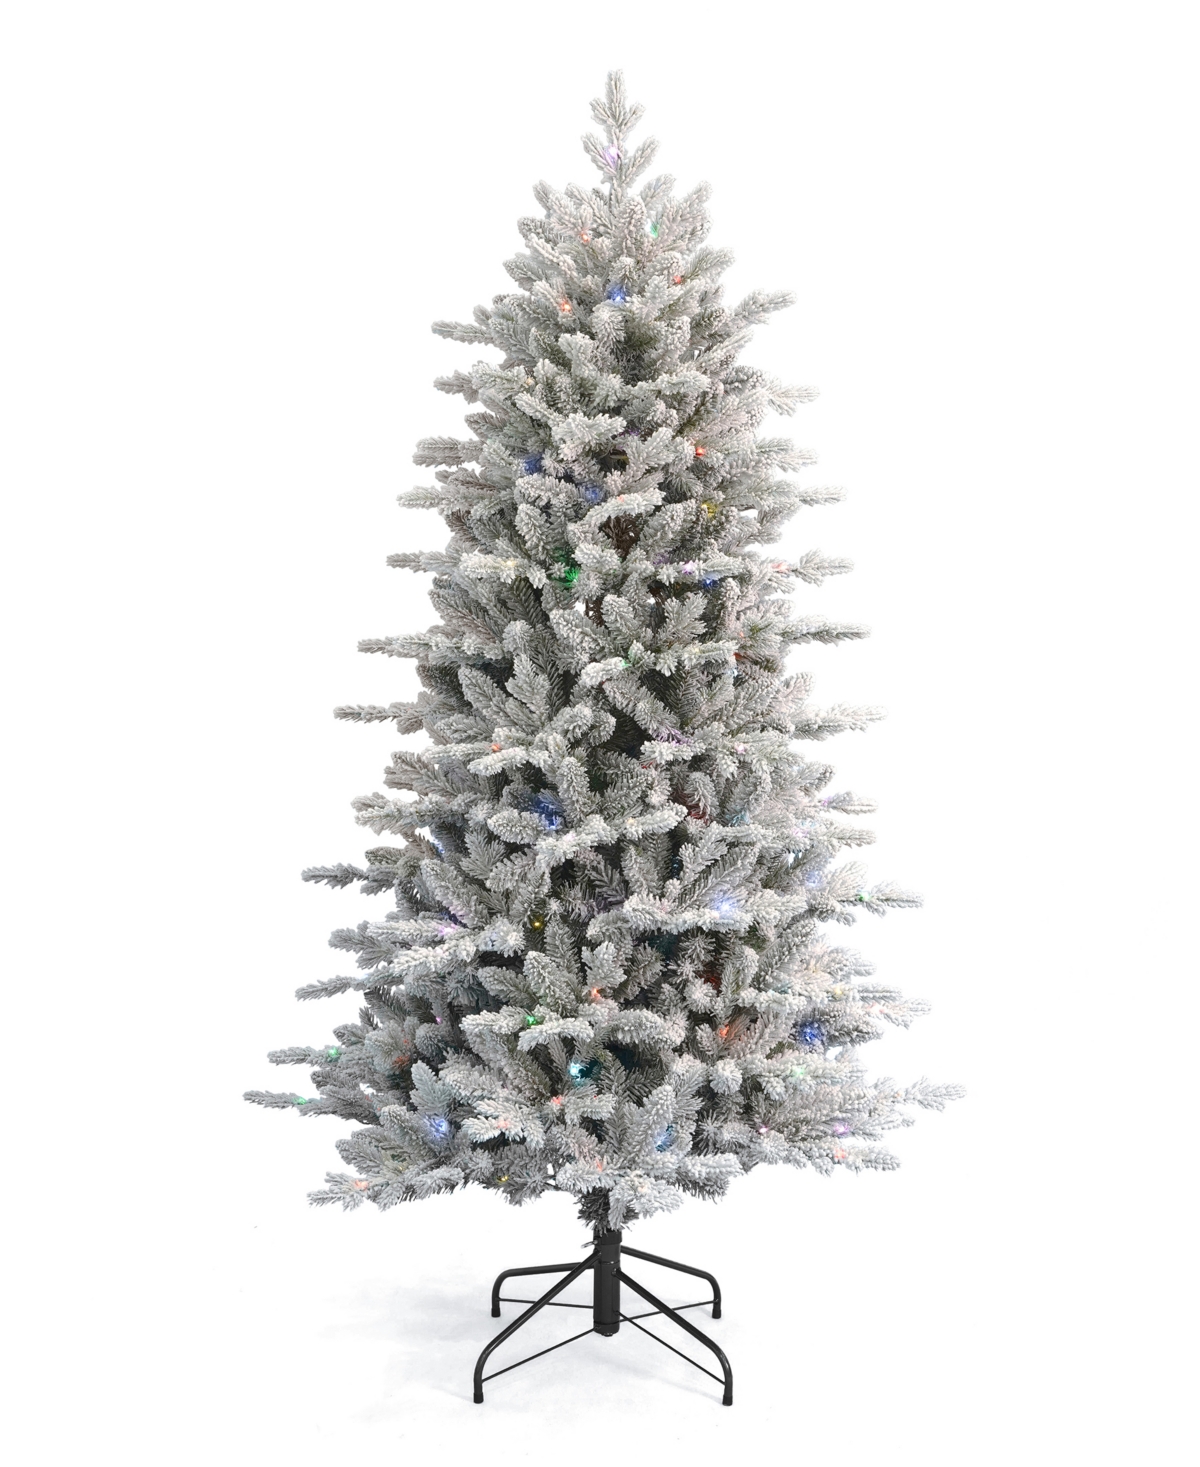 The Bluffton Flocked Pine 6' Pe, Pvc Tree, 1813 Tips, 300 Rgbw Lights, Metal Stand, Ez-Connect - White